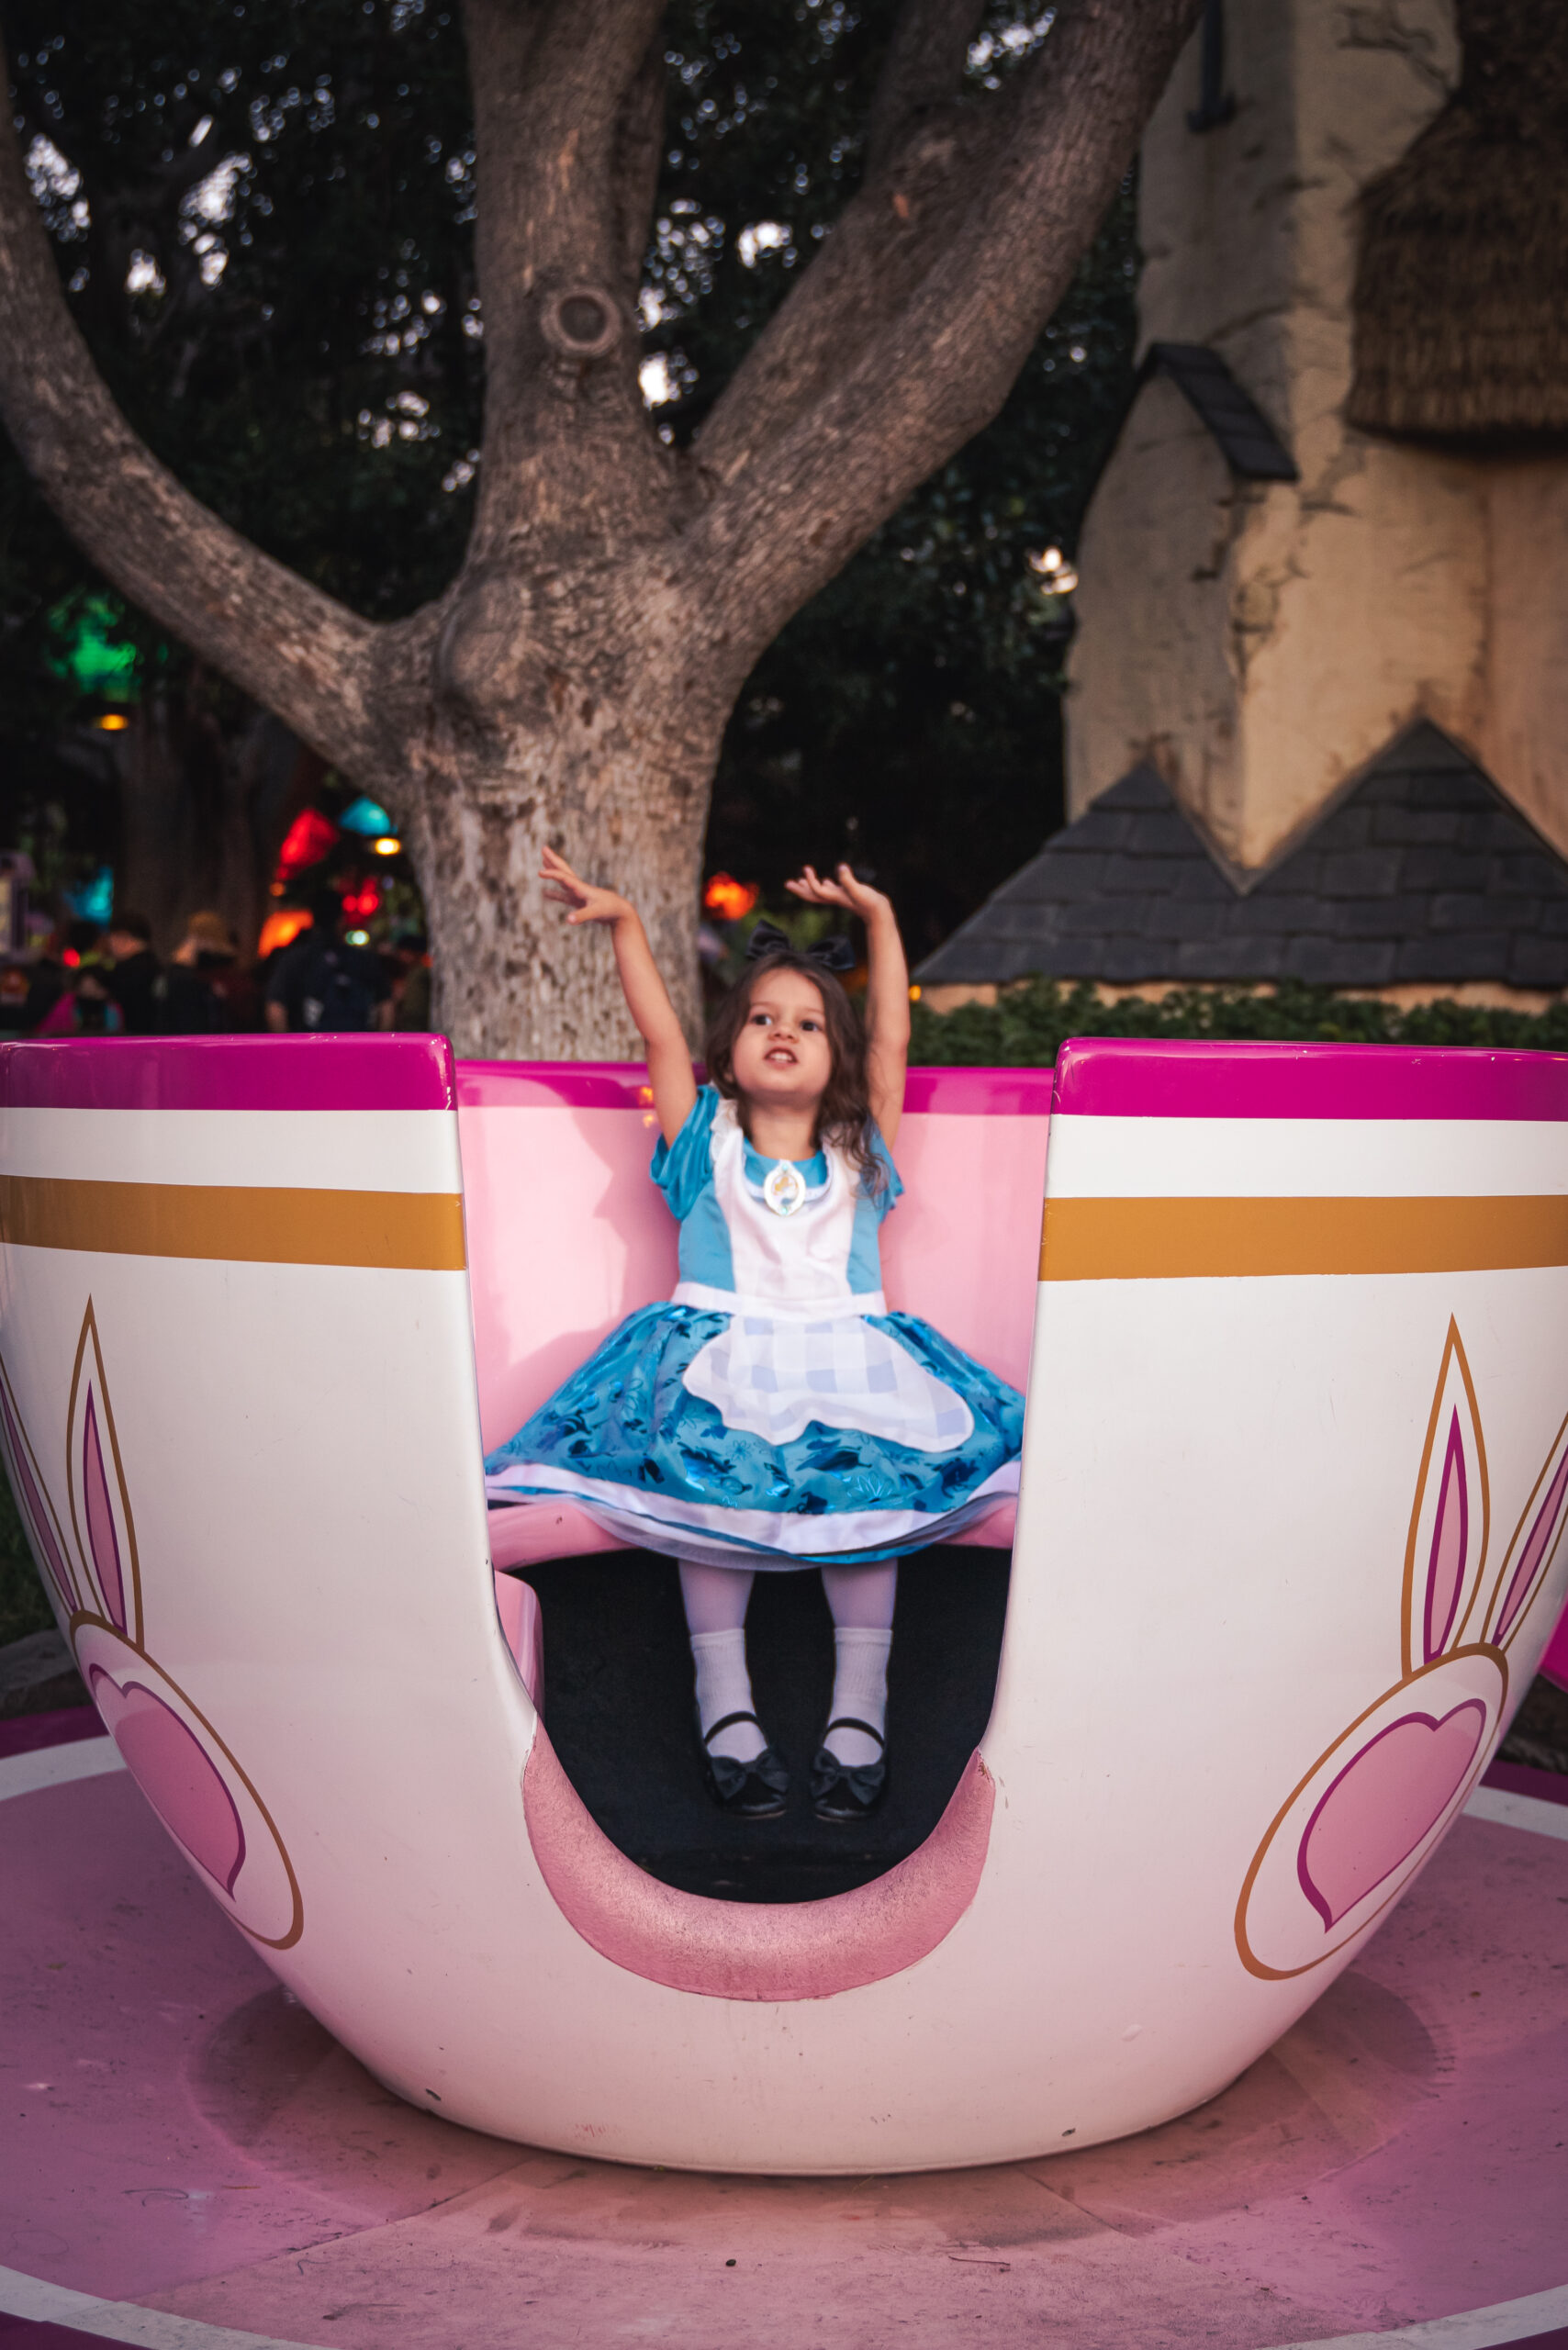 A child dressed as Alice in Wonderland dances while sitting in a teacup in Fantasyland at Disneyland in Anaheim, California